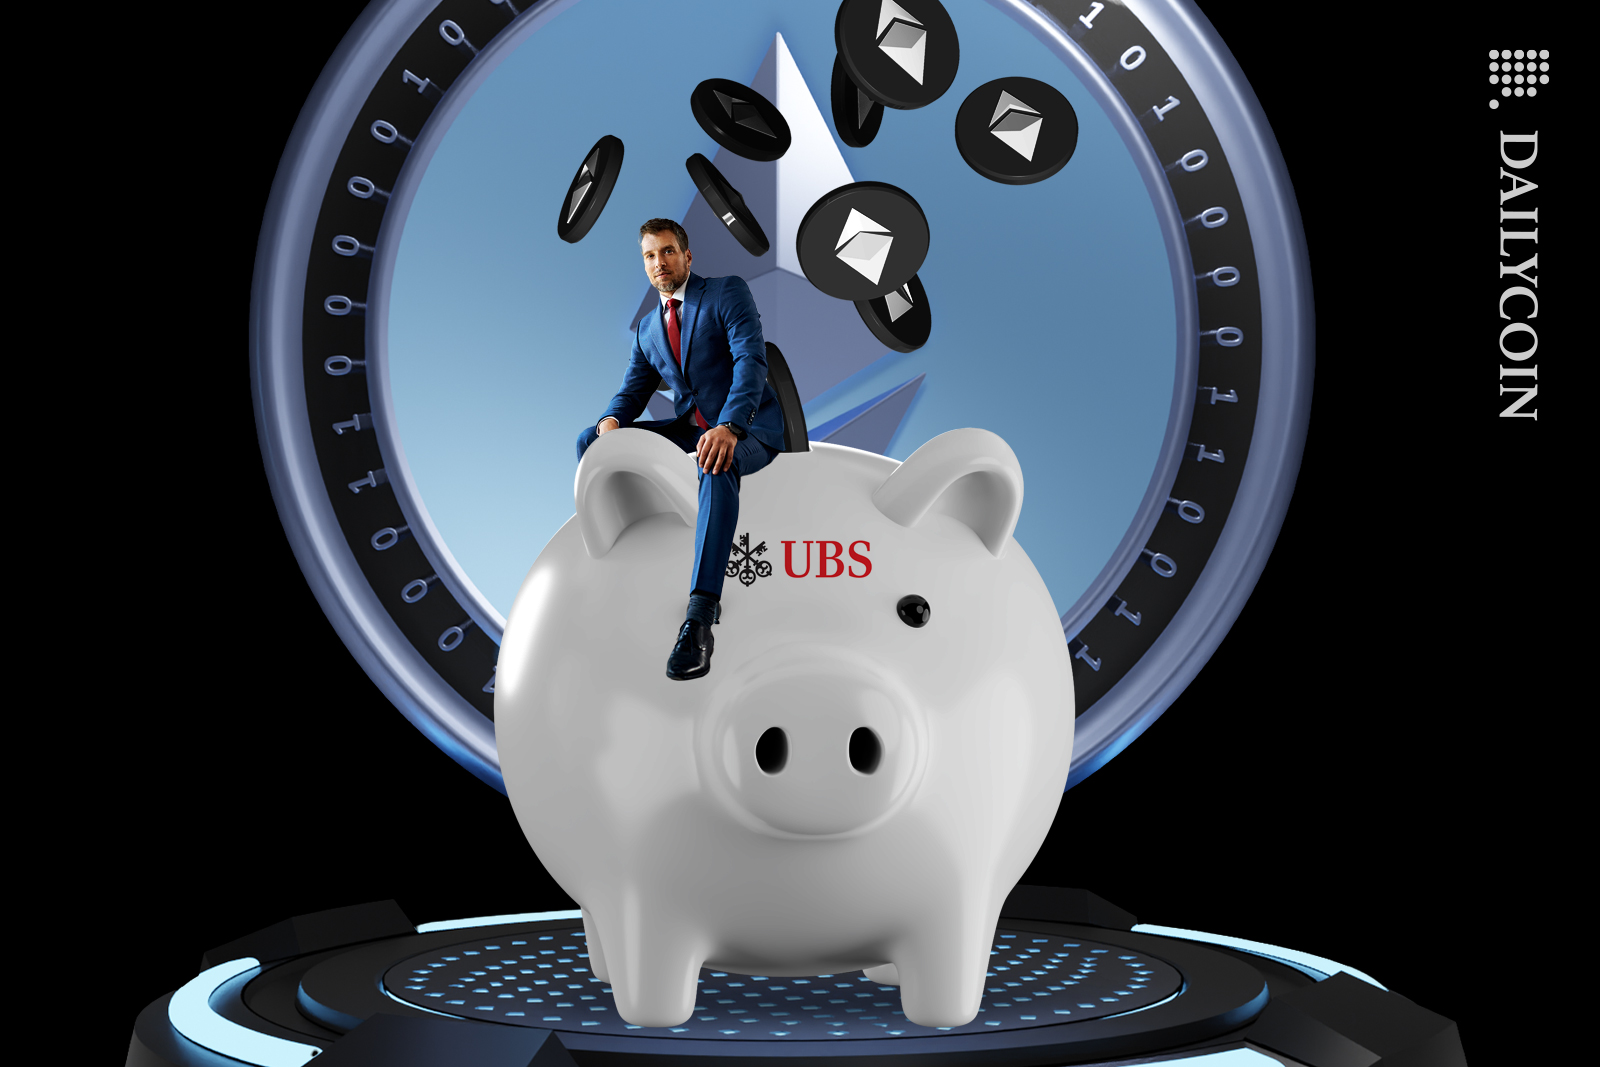 Banker man sitting on a giant UBS piggy bank, collecting ETH coins.